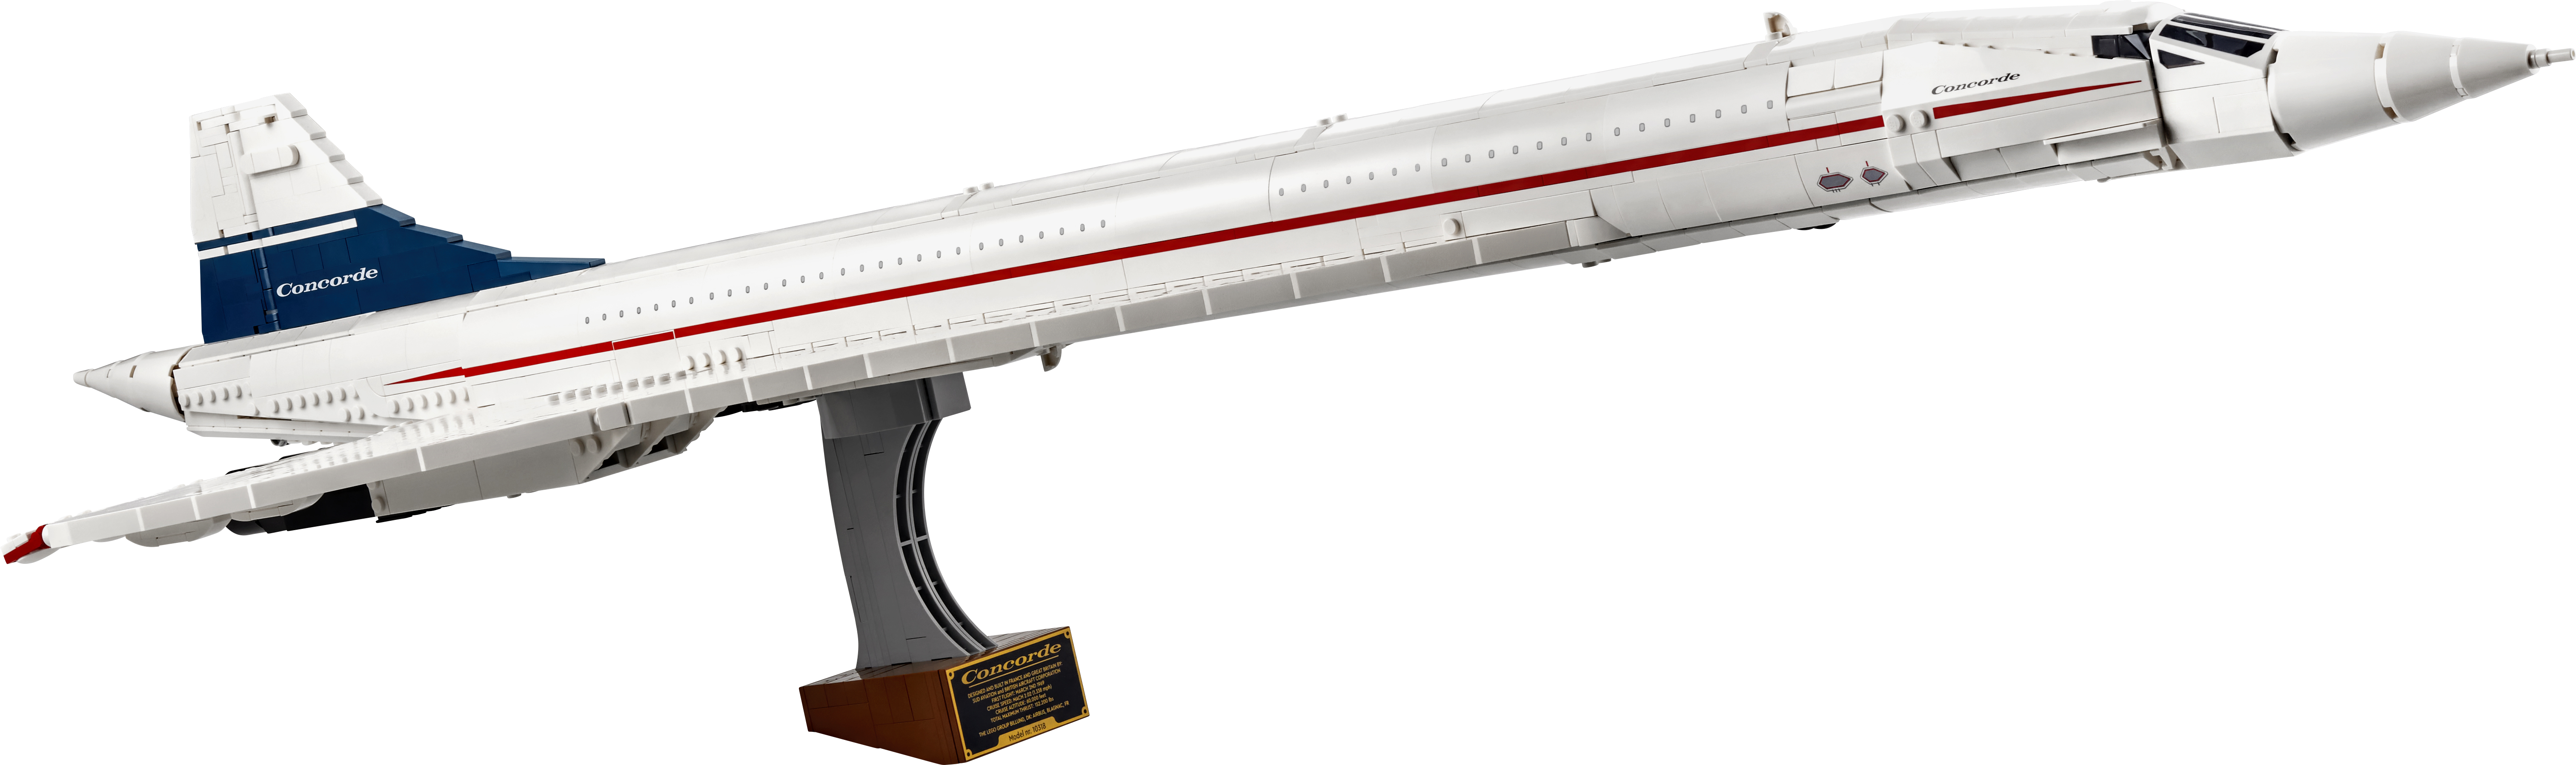 Concorde 10318 | LEGO® Icons | Buy online at the Official LEGO